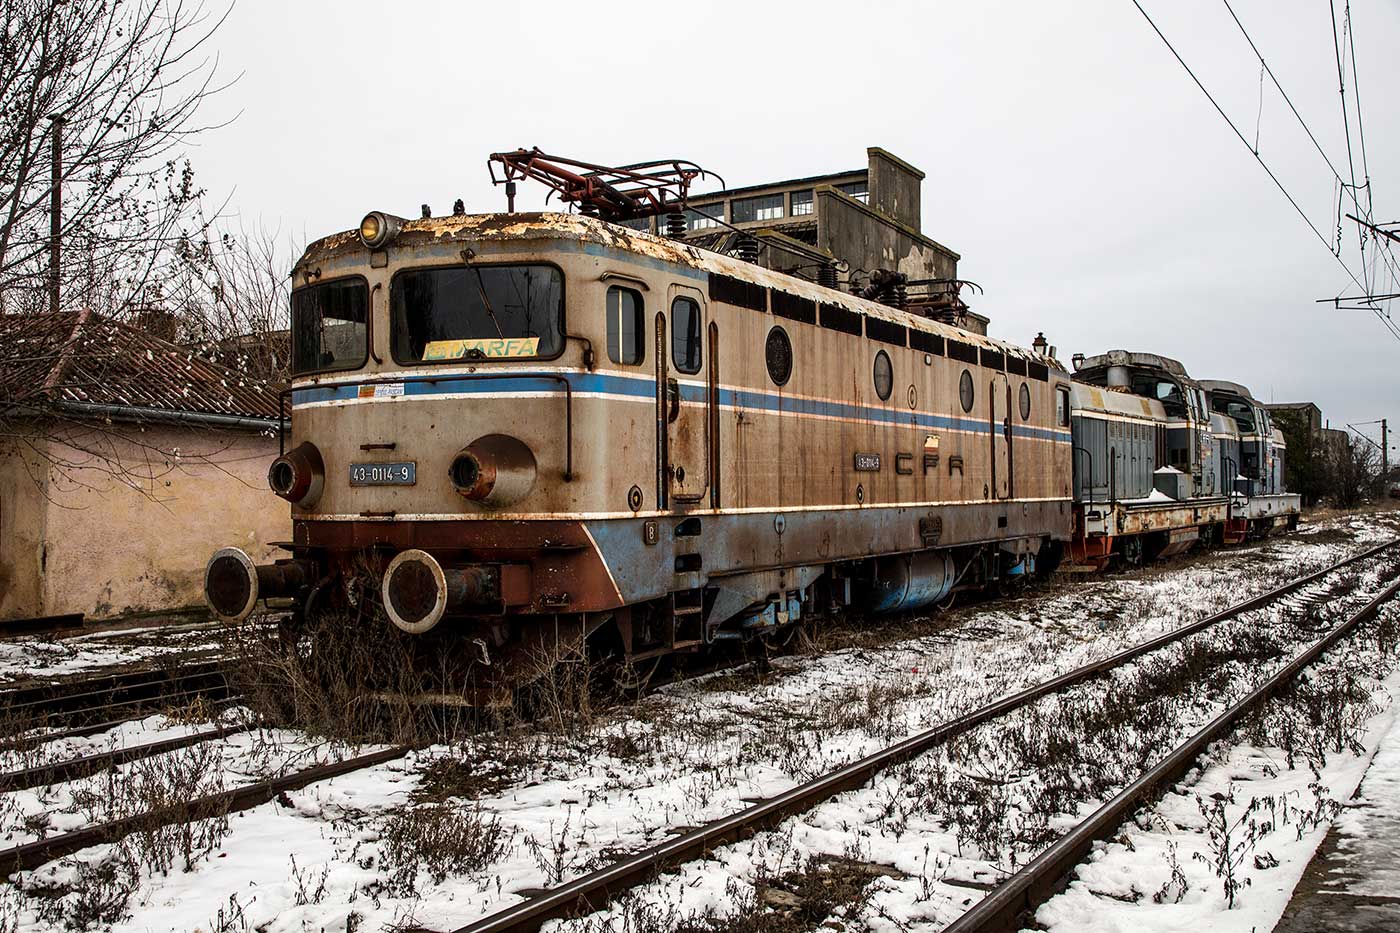 Either an ASEA B-model, or an LE 3400 locomotive, the local variant of the JŽ 441 produced by Rade Končar and MIN Niš.